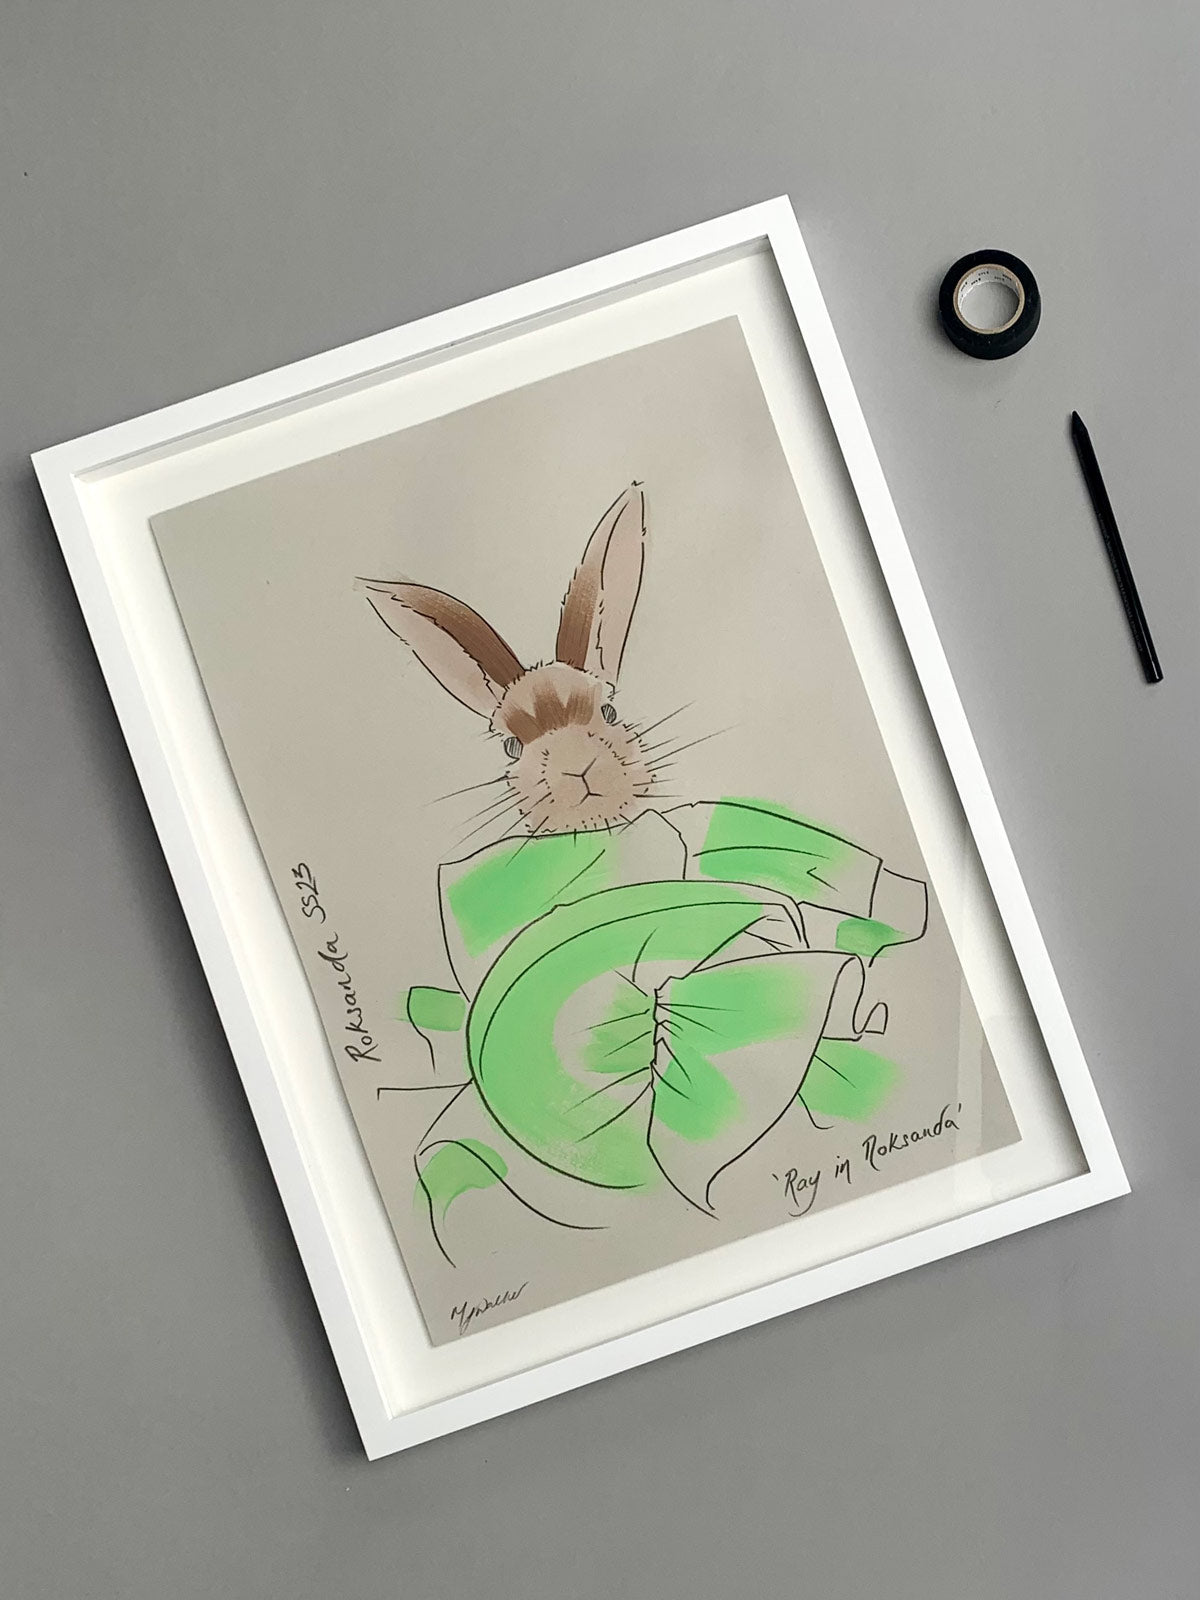 Colourful illustration of a bunny in designer Roksanda clothing on a grey background.